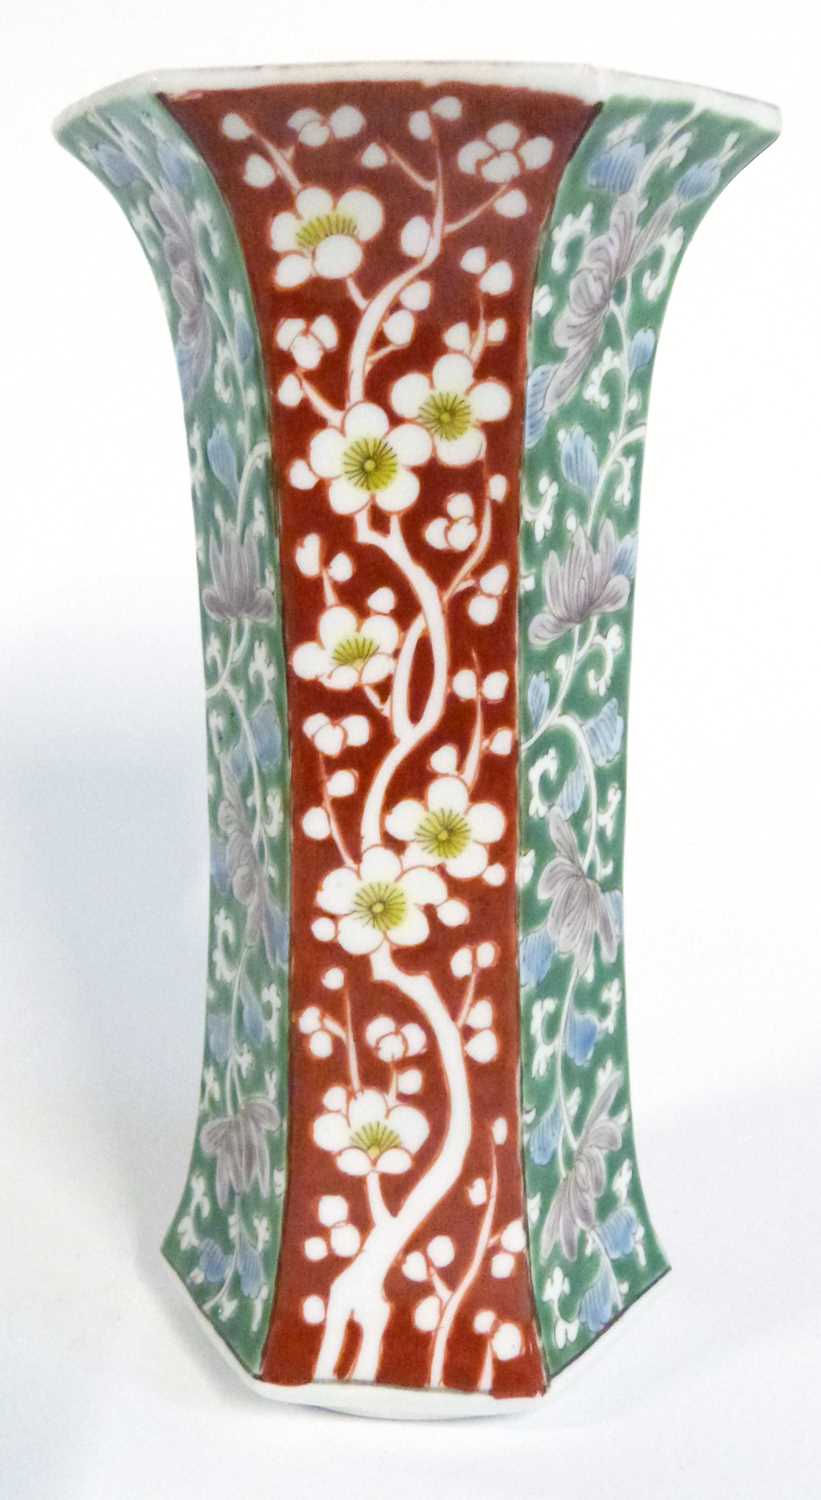 Chinese porcelain vase of tapered form with Famille Rose/Vert floral decoration, 18cm high, probably - Image 2 of 5